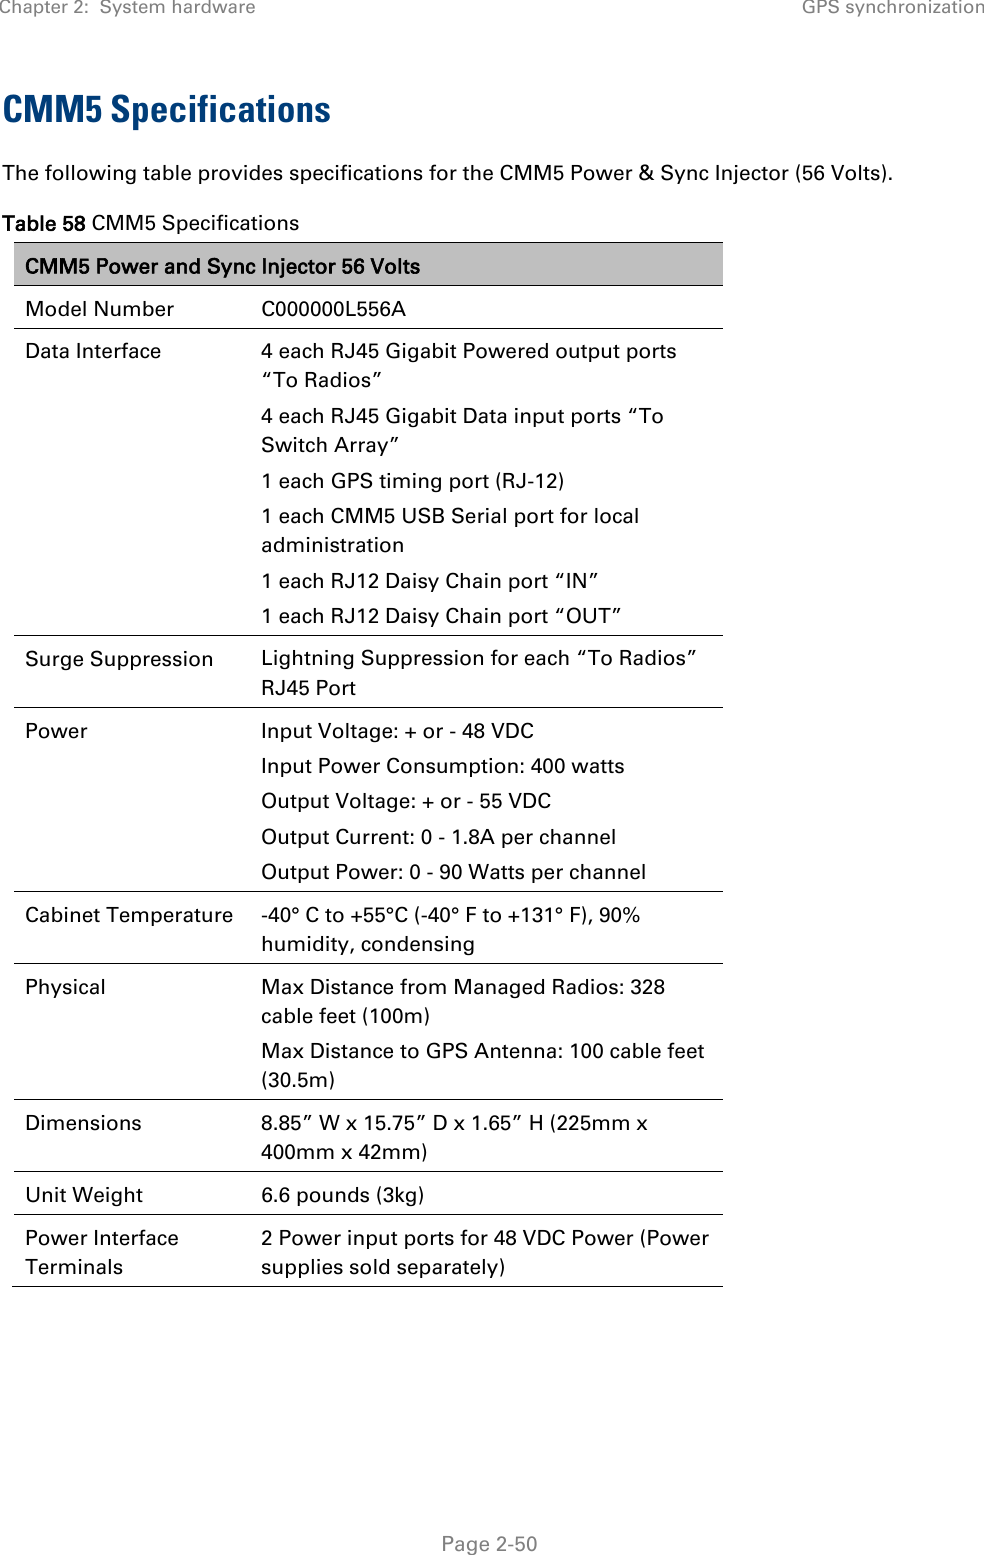 Chapter 2:  System hardware GPS synchronization   Page 2-50 CMM5 Specifications The following table provides specifications for the CMM5 Power &amp; Sync Injector (56 Volts). Table 58 CMM5 Specifications CMM5 Power and Sync Injector 56 Volts Model Number C000000L556A Data Interface 4 each RJ45 Gigabit Powered output ports “To Radios” 4 each RJ45 Gigabit Data input ports “To Switch Array” 1 each GPS timing port (RJ-12) 1 each CMM5 USB Serial port for local administration 1 each RJ12 Daisy Chain port “IN” 1 each RJ12 Daisy Chain port “OUT” Surge Suppression  Lightning Suppression for each “To Radios” RJ45 Port Power  Input Voltage: + or - 48 VDC Input Power Consumption: 400 watts Output Voltage: + or - 55 VDC Output Current: 0 - 1.8A per channel Output Power: 0 - 90 Watts per channel Cabinet Temperature -40° C to +55°C (-40° F to +131° F), 90% humidity, condensing Physical  Max Distance from Managed Radios: 328 cable feet (100m) Max Distance to GPS Antenna: 100 cable feet (30.5m) Dimensions 8.85” W x 15.75” D x 1.65” H (225mm x 400mm x 42mm) Unit Weight 6.6 pounds (3kg) Power Interface Terminals 2 Power input ports for 48 VDC Power (Power supplies sold separately)    